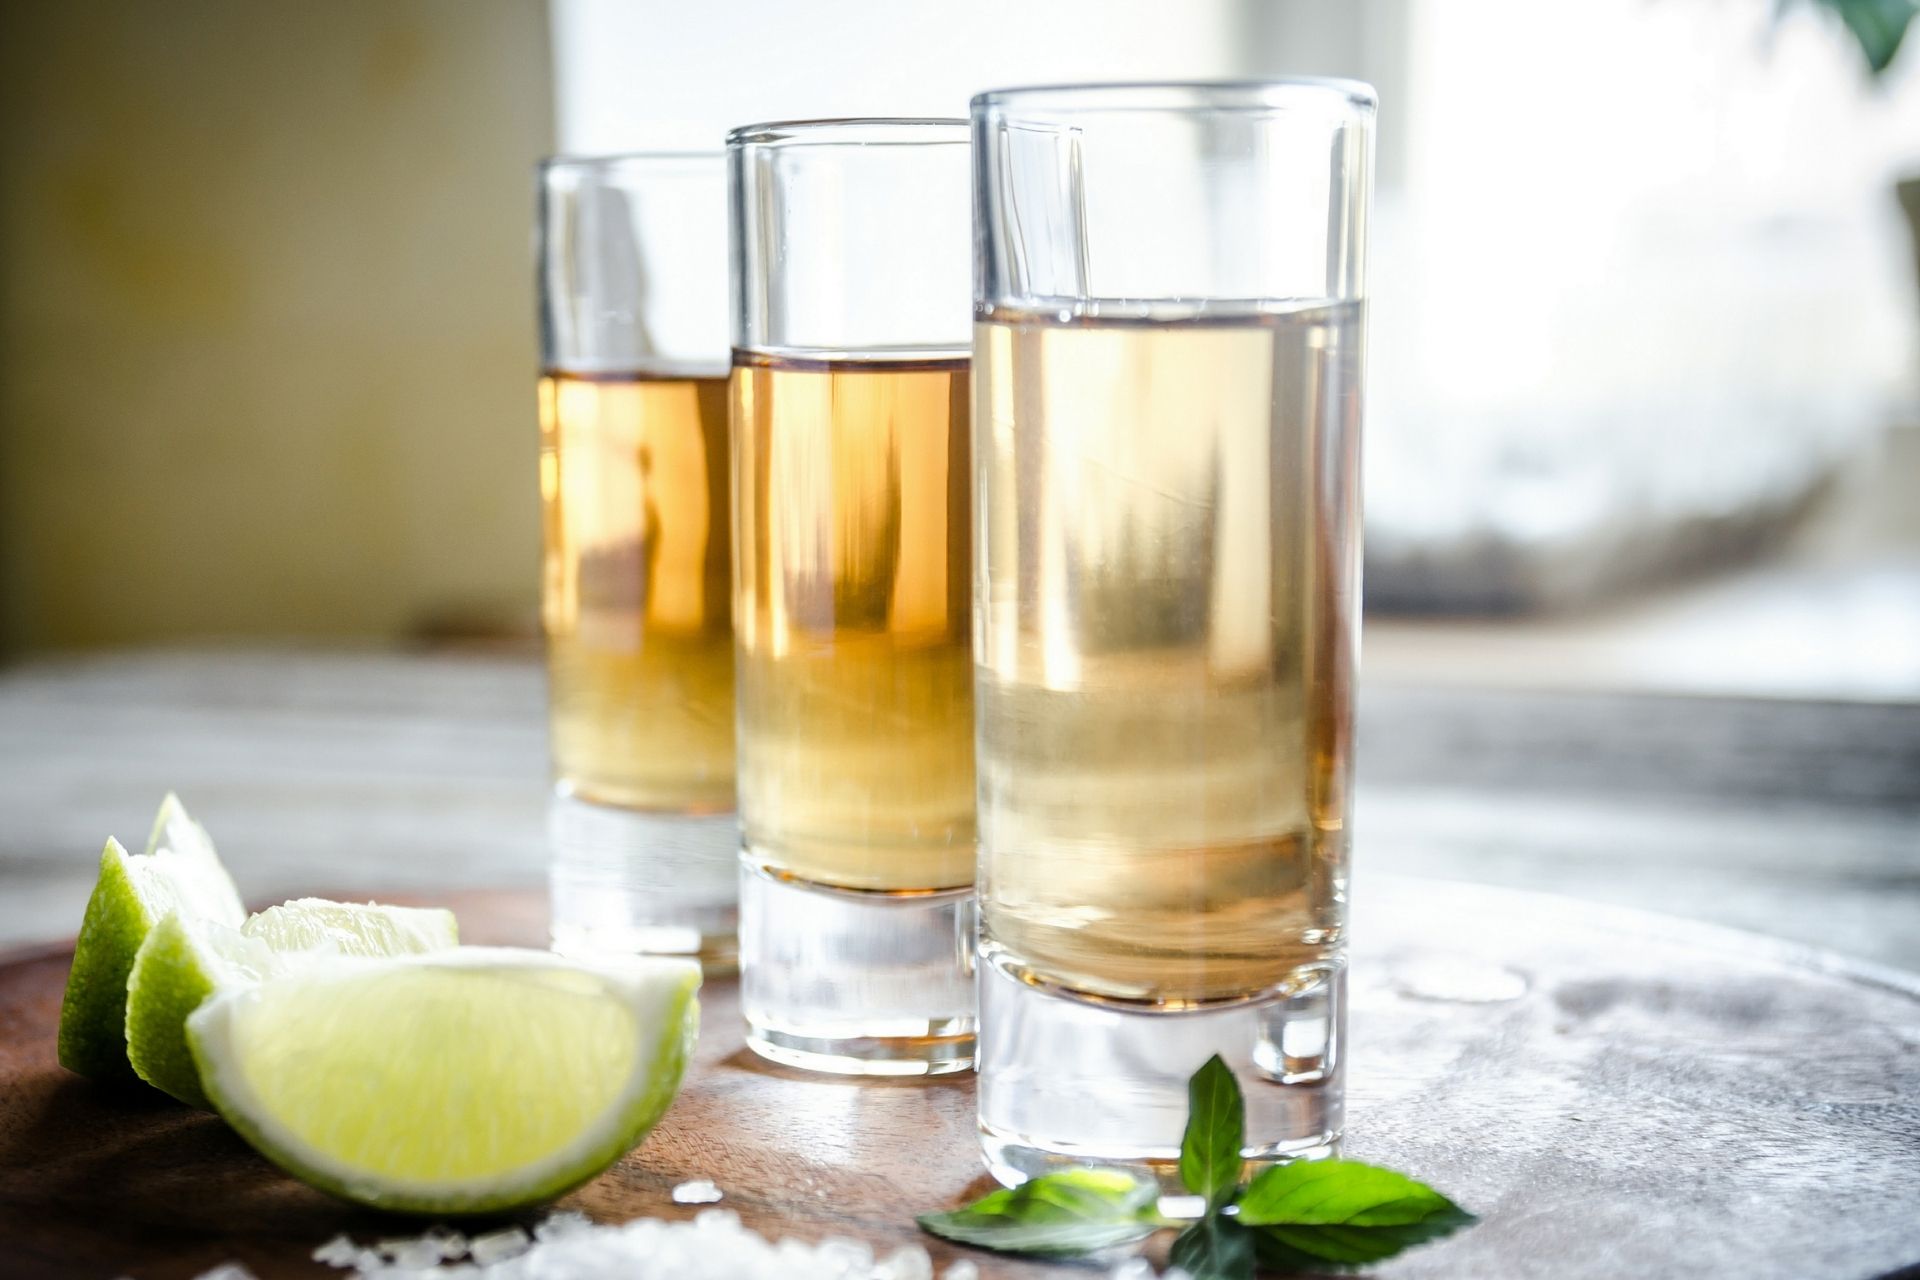 10 Best Chasers For Tequila